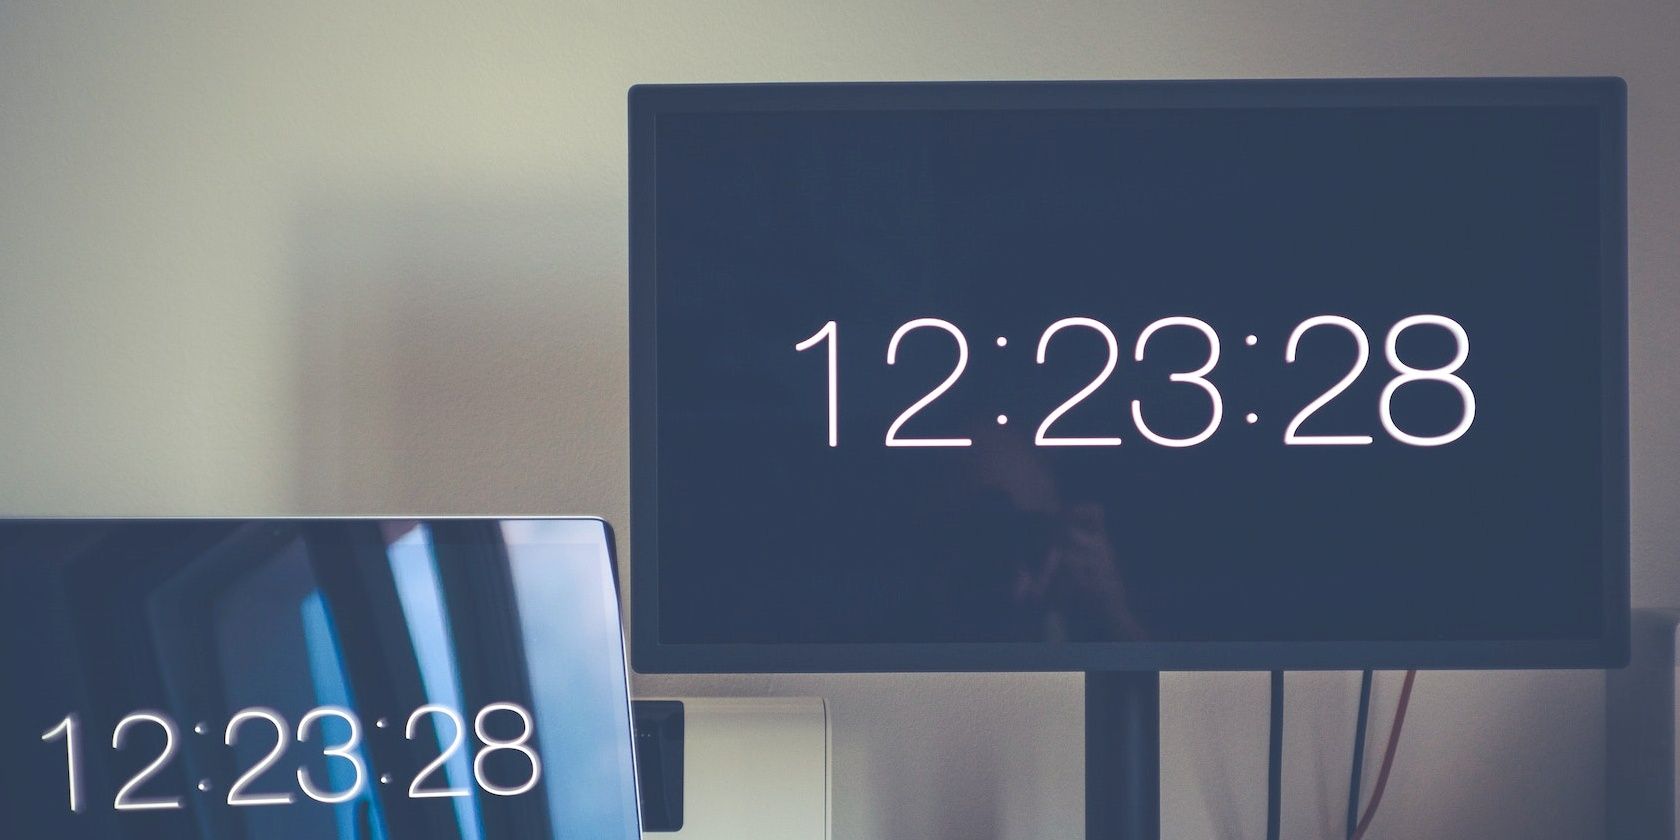 Two monitors showing timers